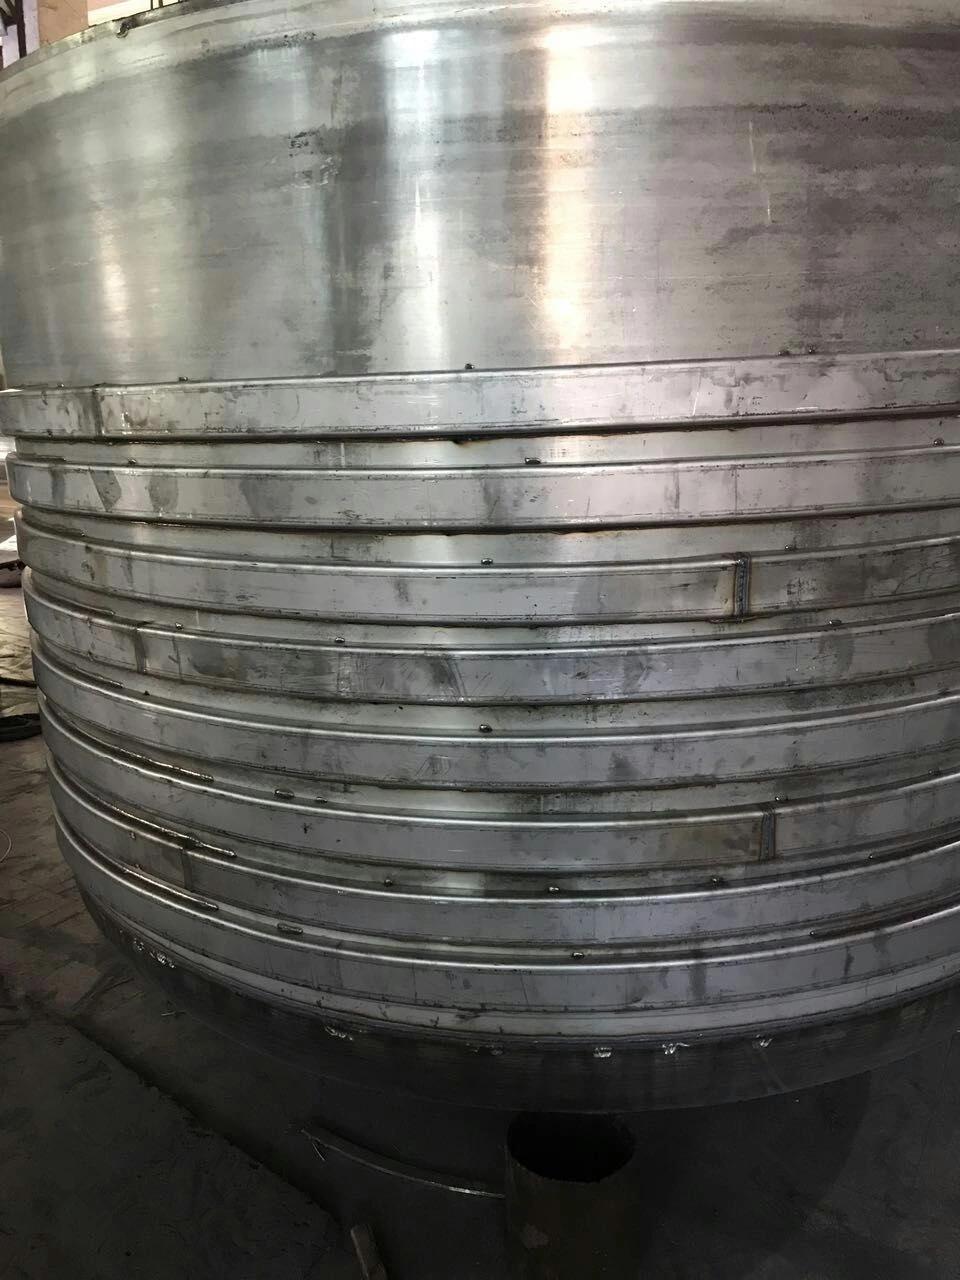 Big Stainless Steel Tanks for Milk Juice Production Line